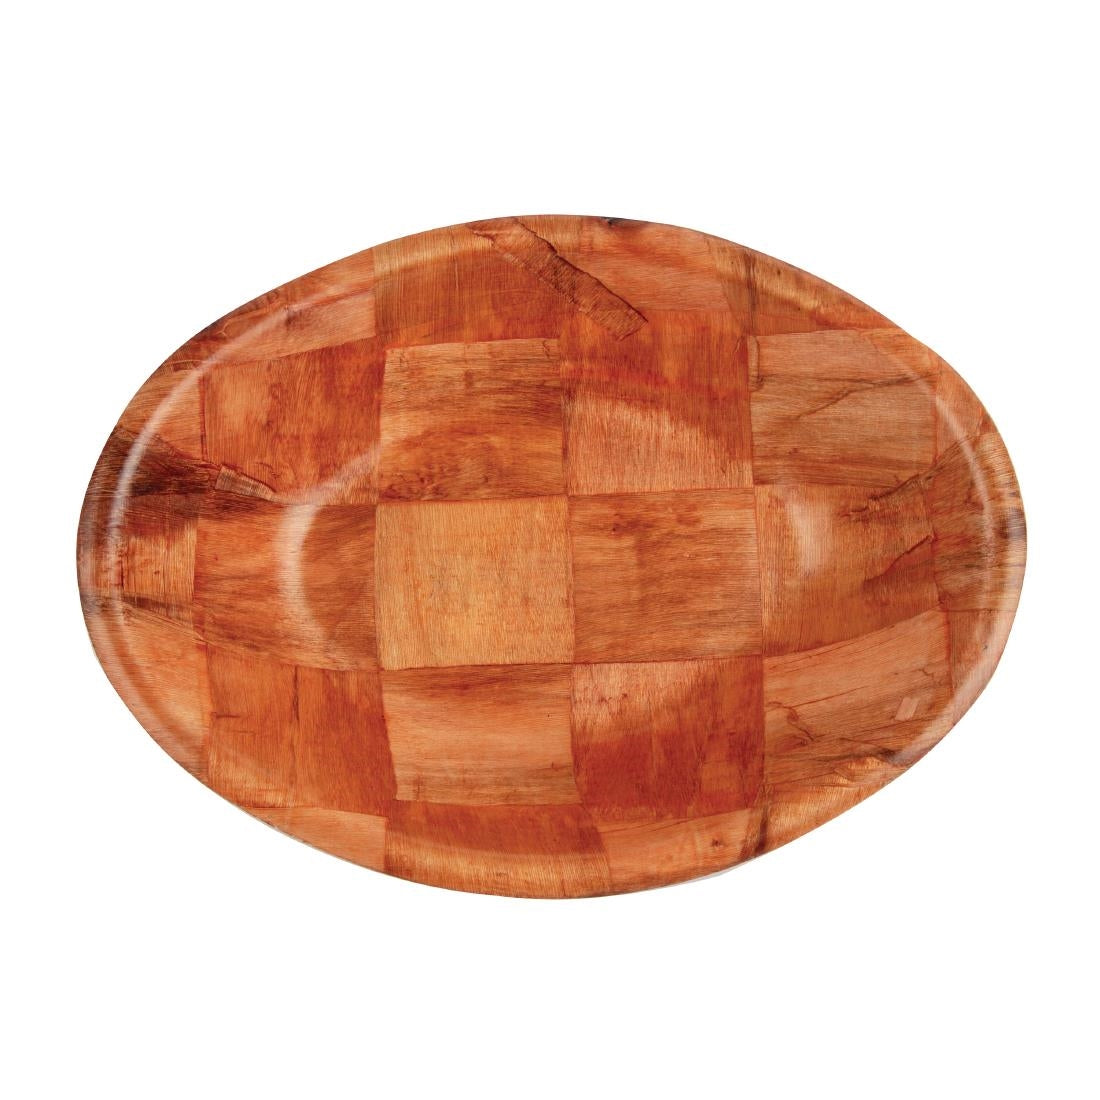 Oval Wooden Bowl Large L093